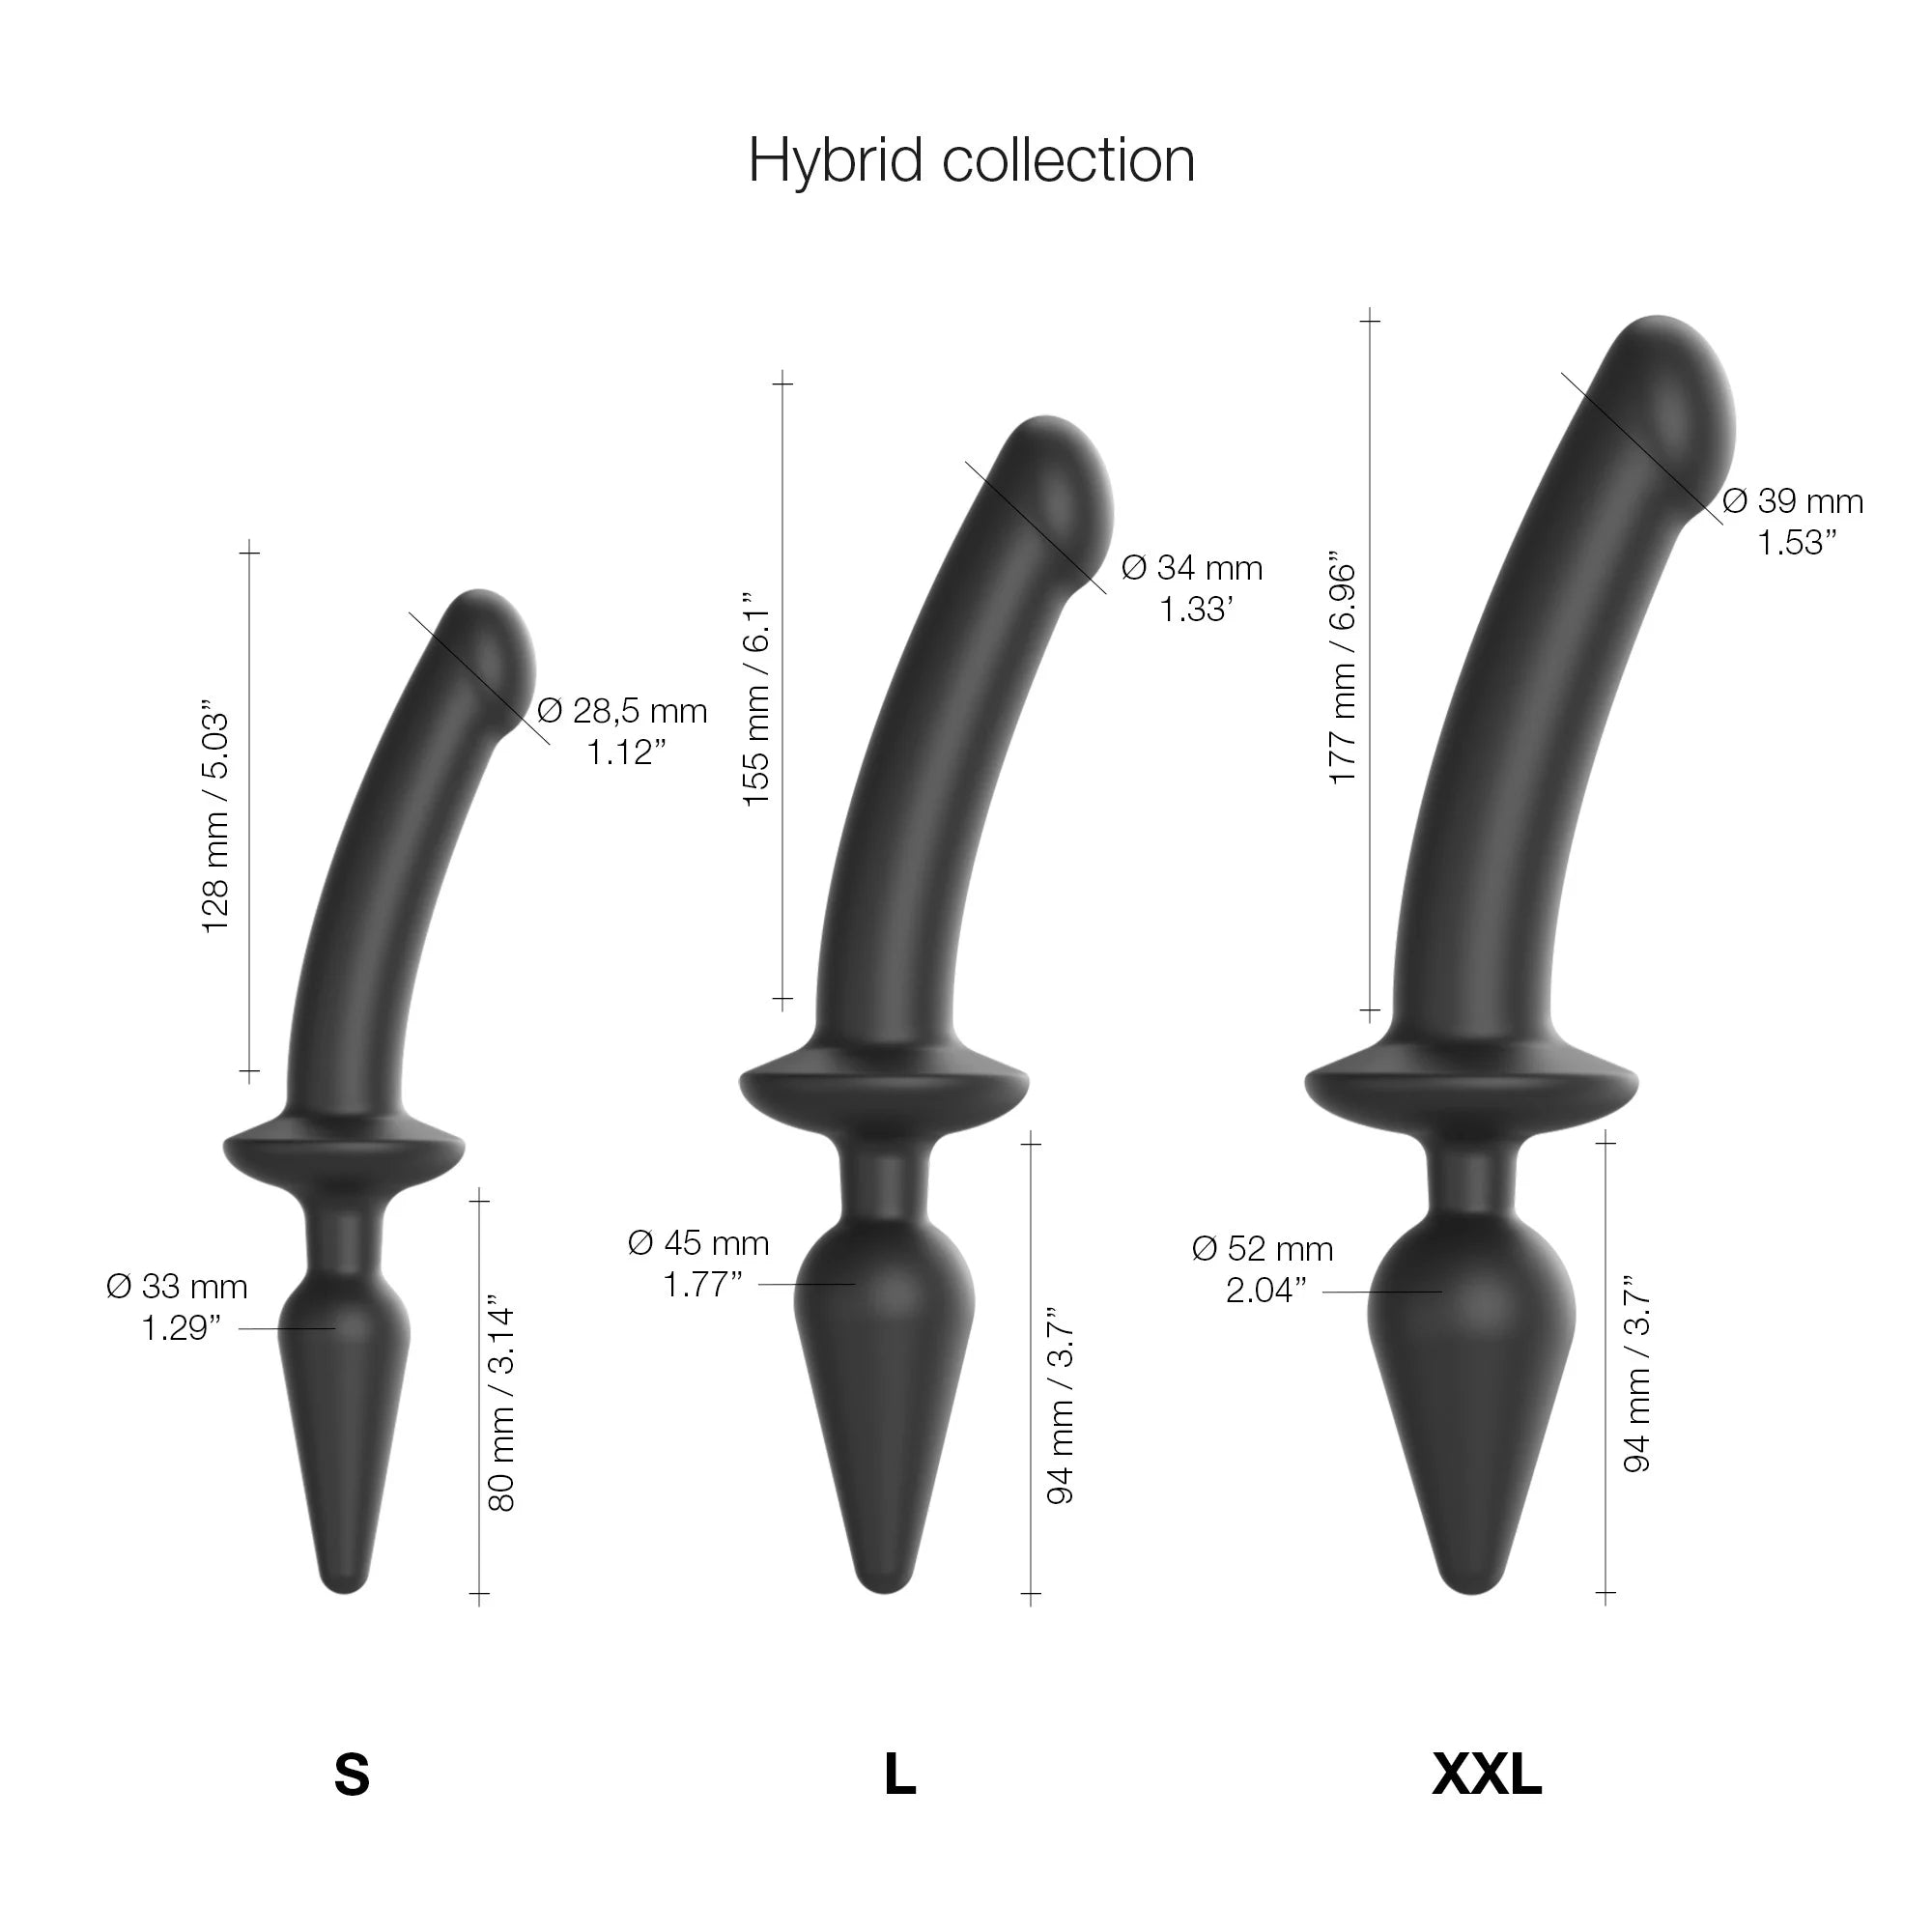 Strap-On-Me Hybrid Collection Switch Plug-In Dual-Ended Dildo & Plug - Black